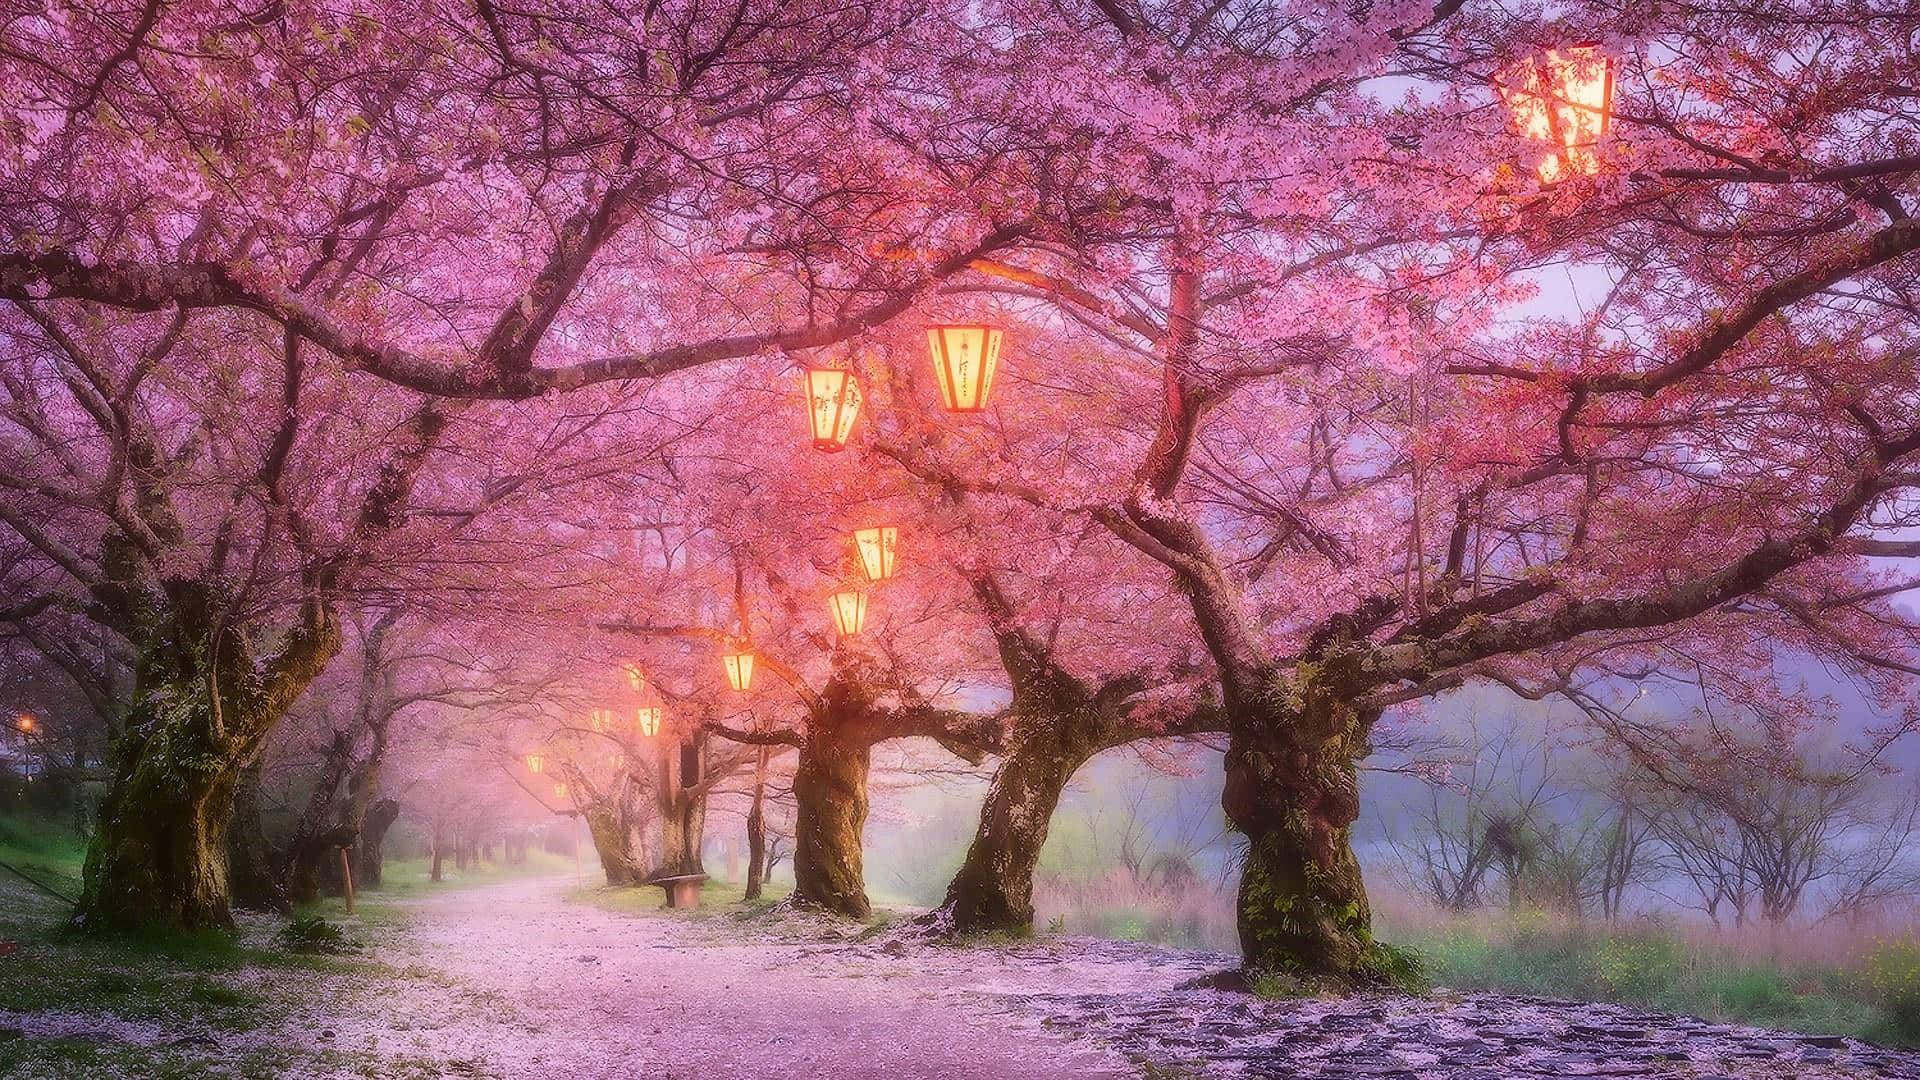 "Beauty in the Night: Cherry Blossoms Illuminated" Wallpaper